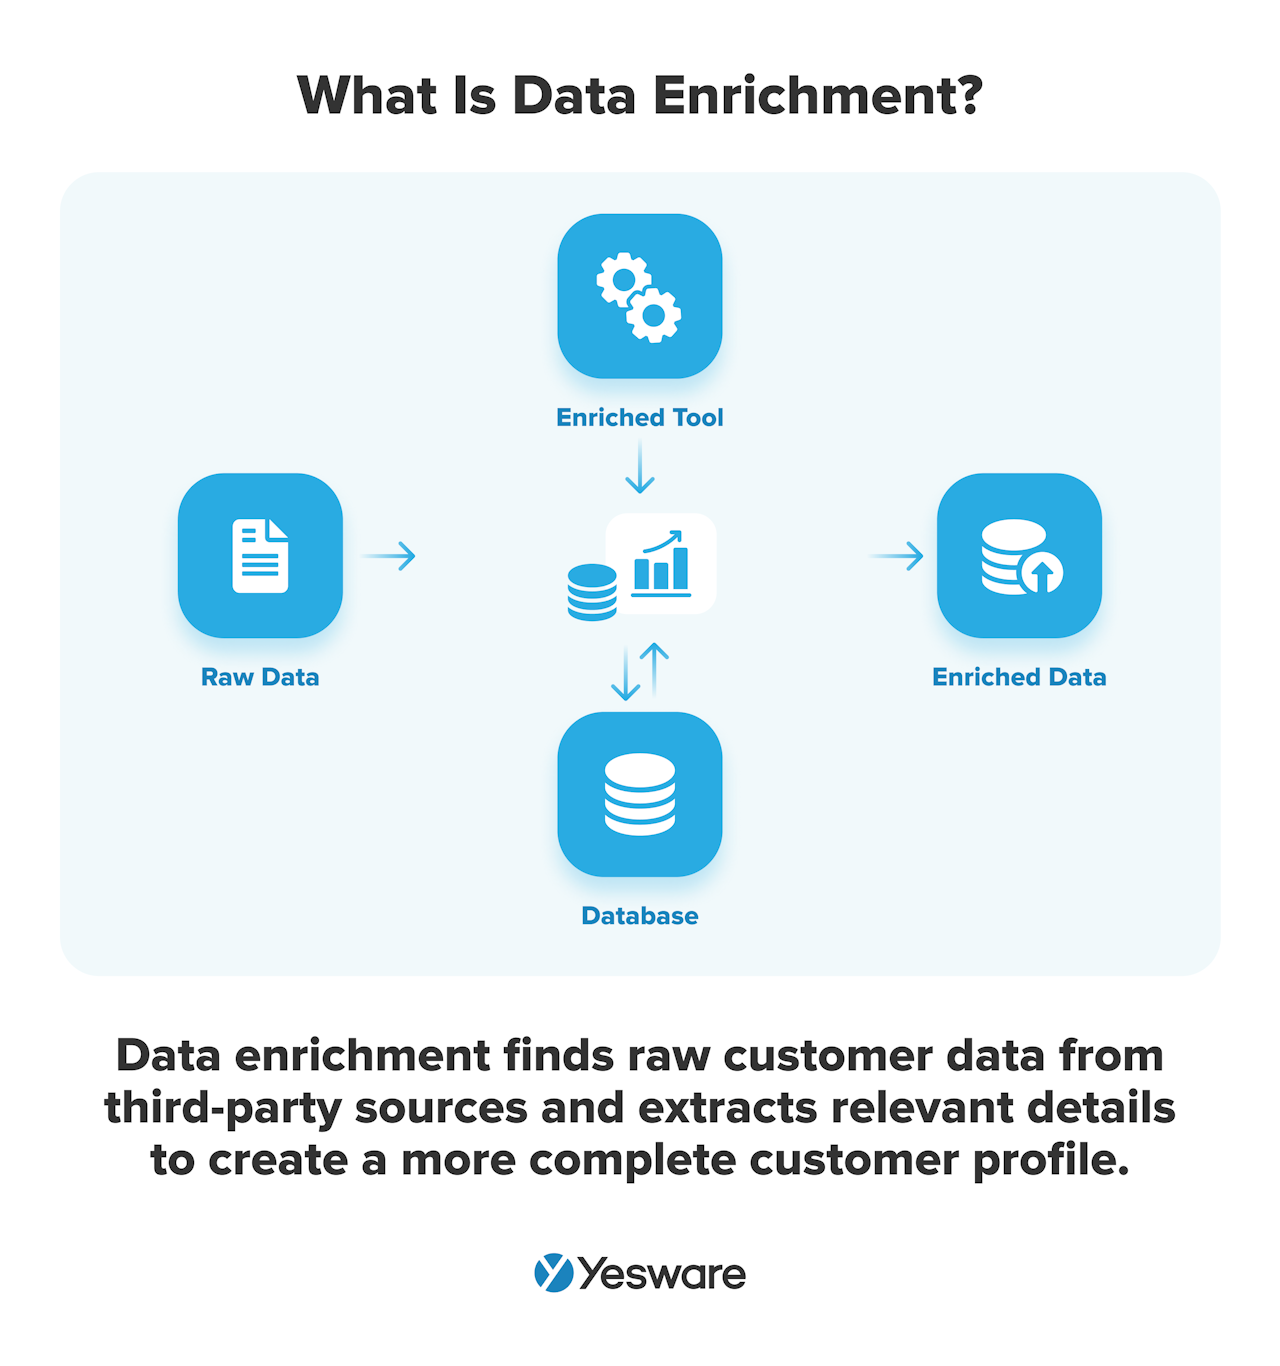 what is data enrichment?